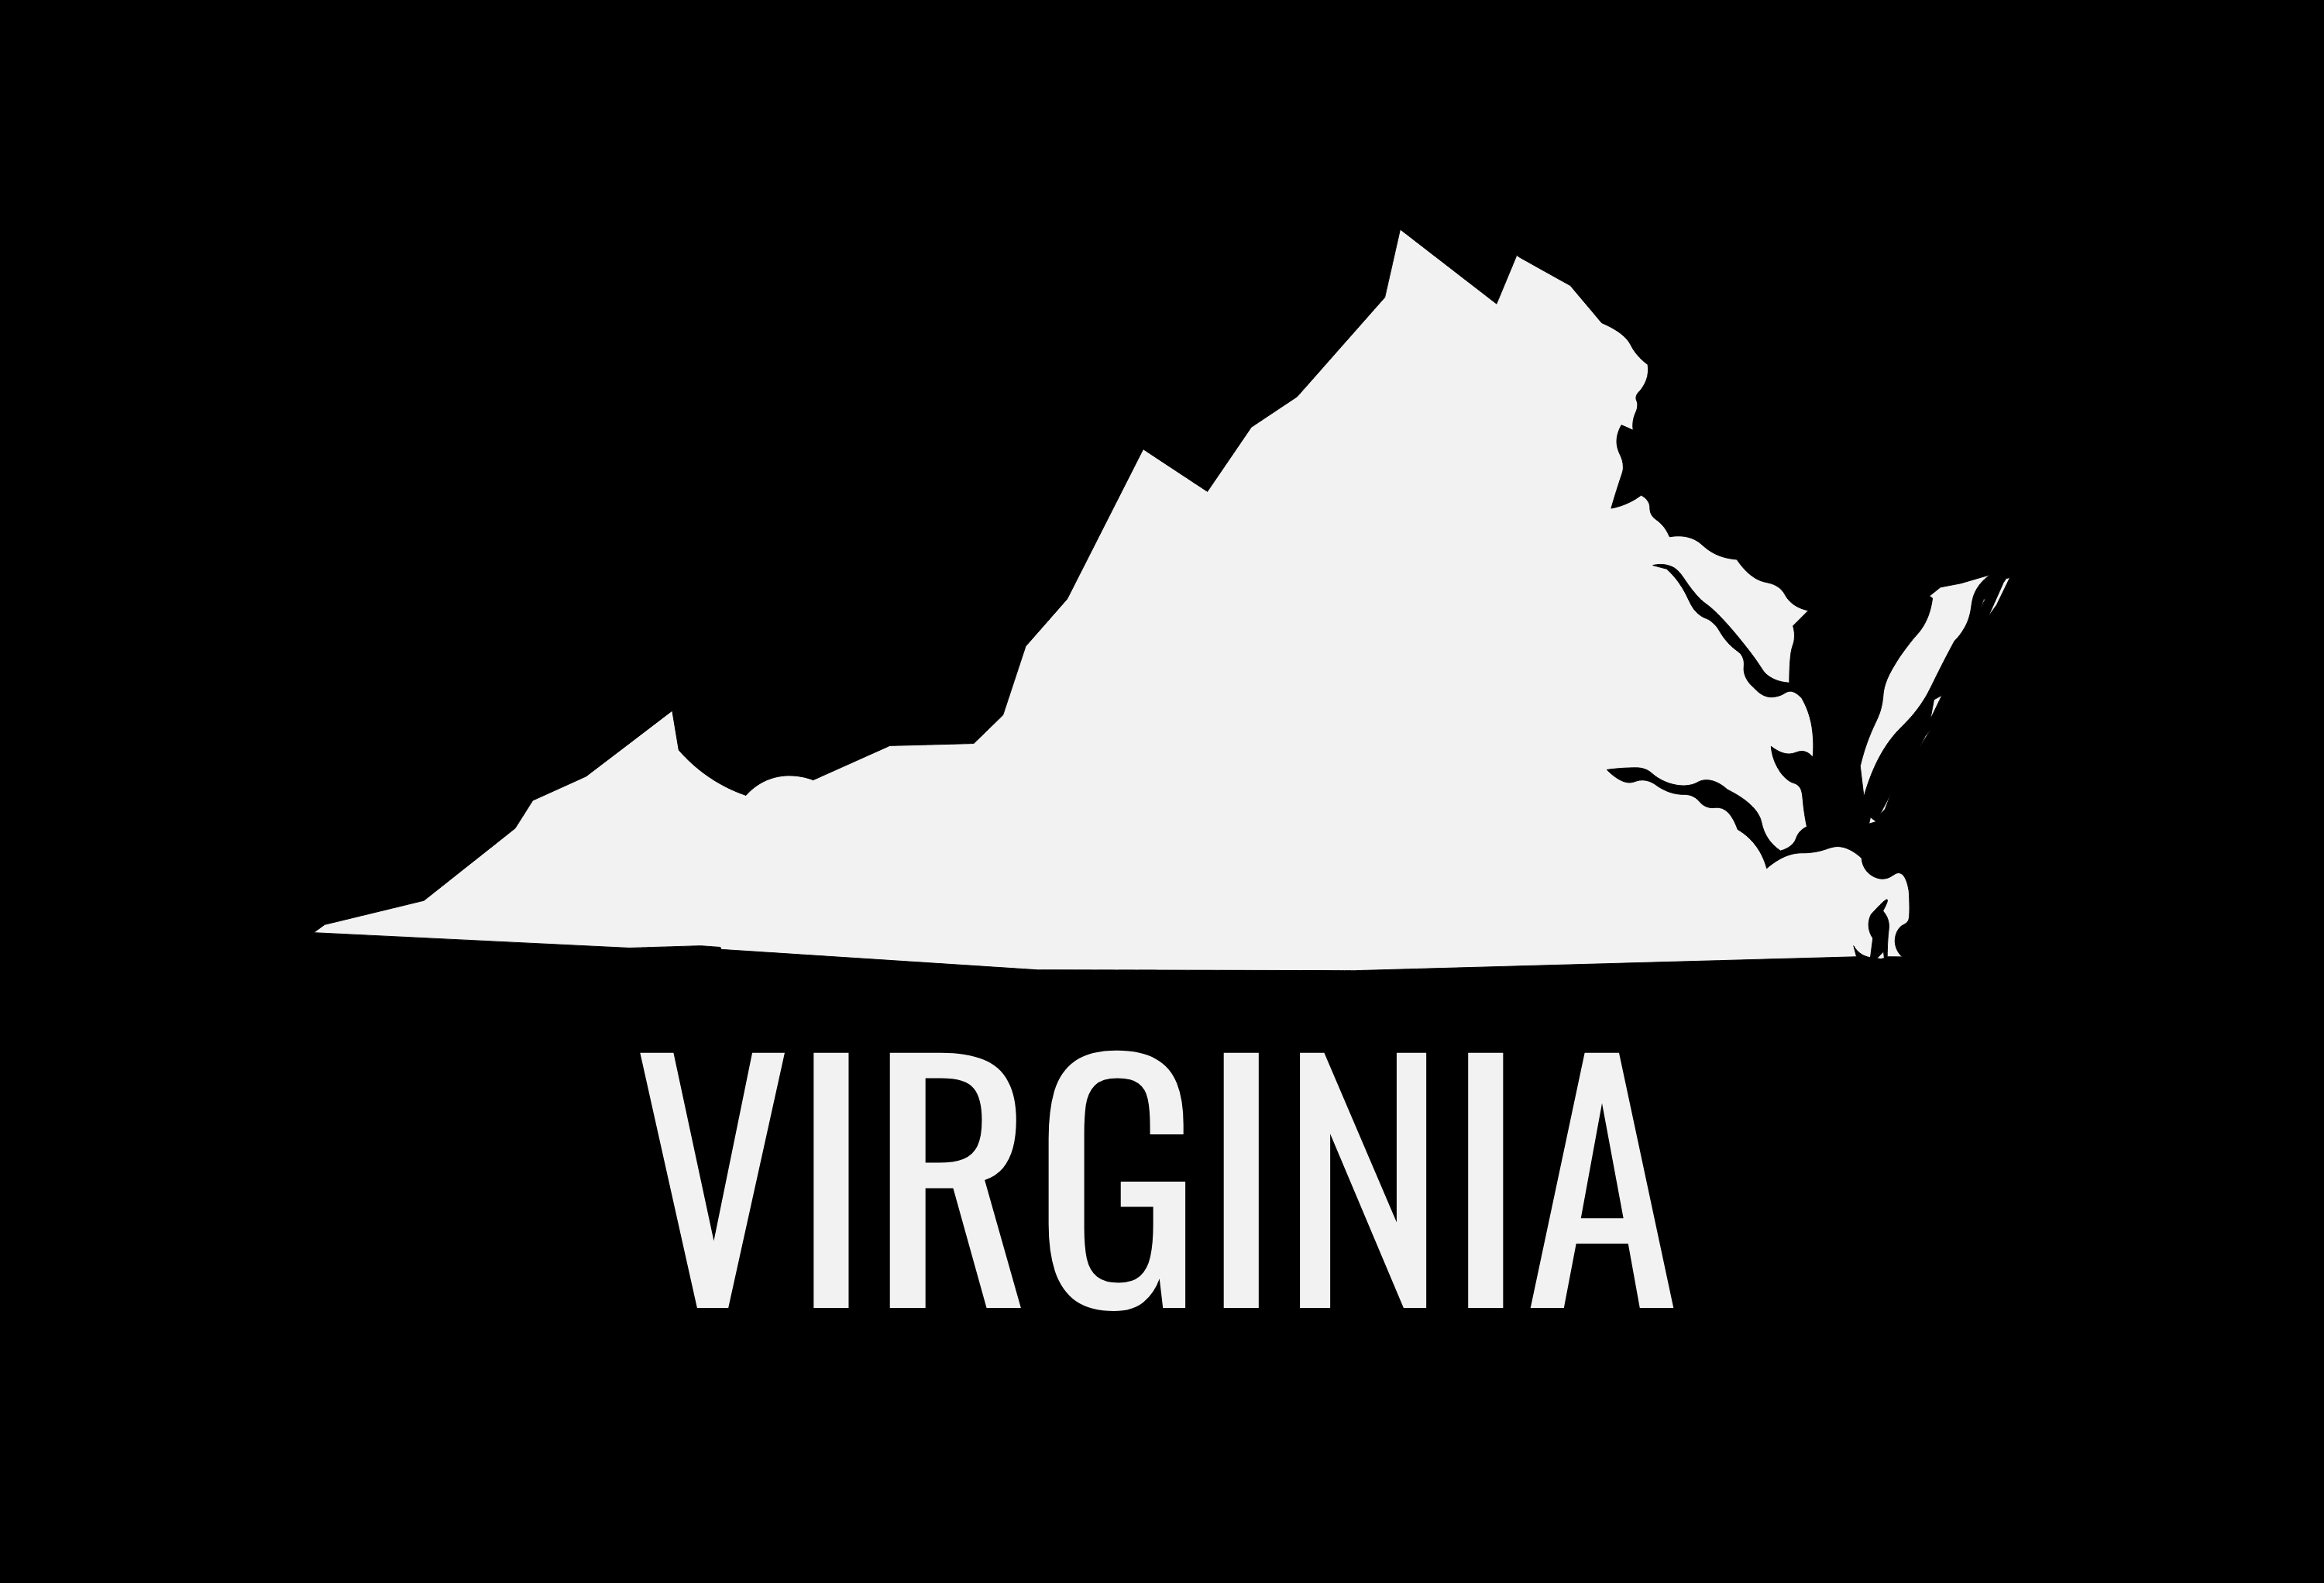 Virginia State Map Car Decal - Permanent Vinyl Sticker for Cars, Vehicle, Doors, Windows, Laptop, and more!